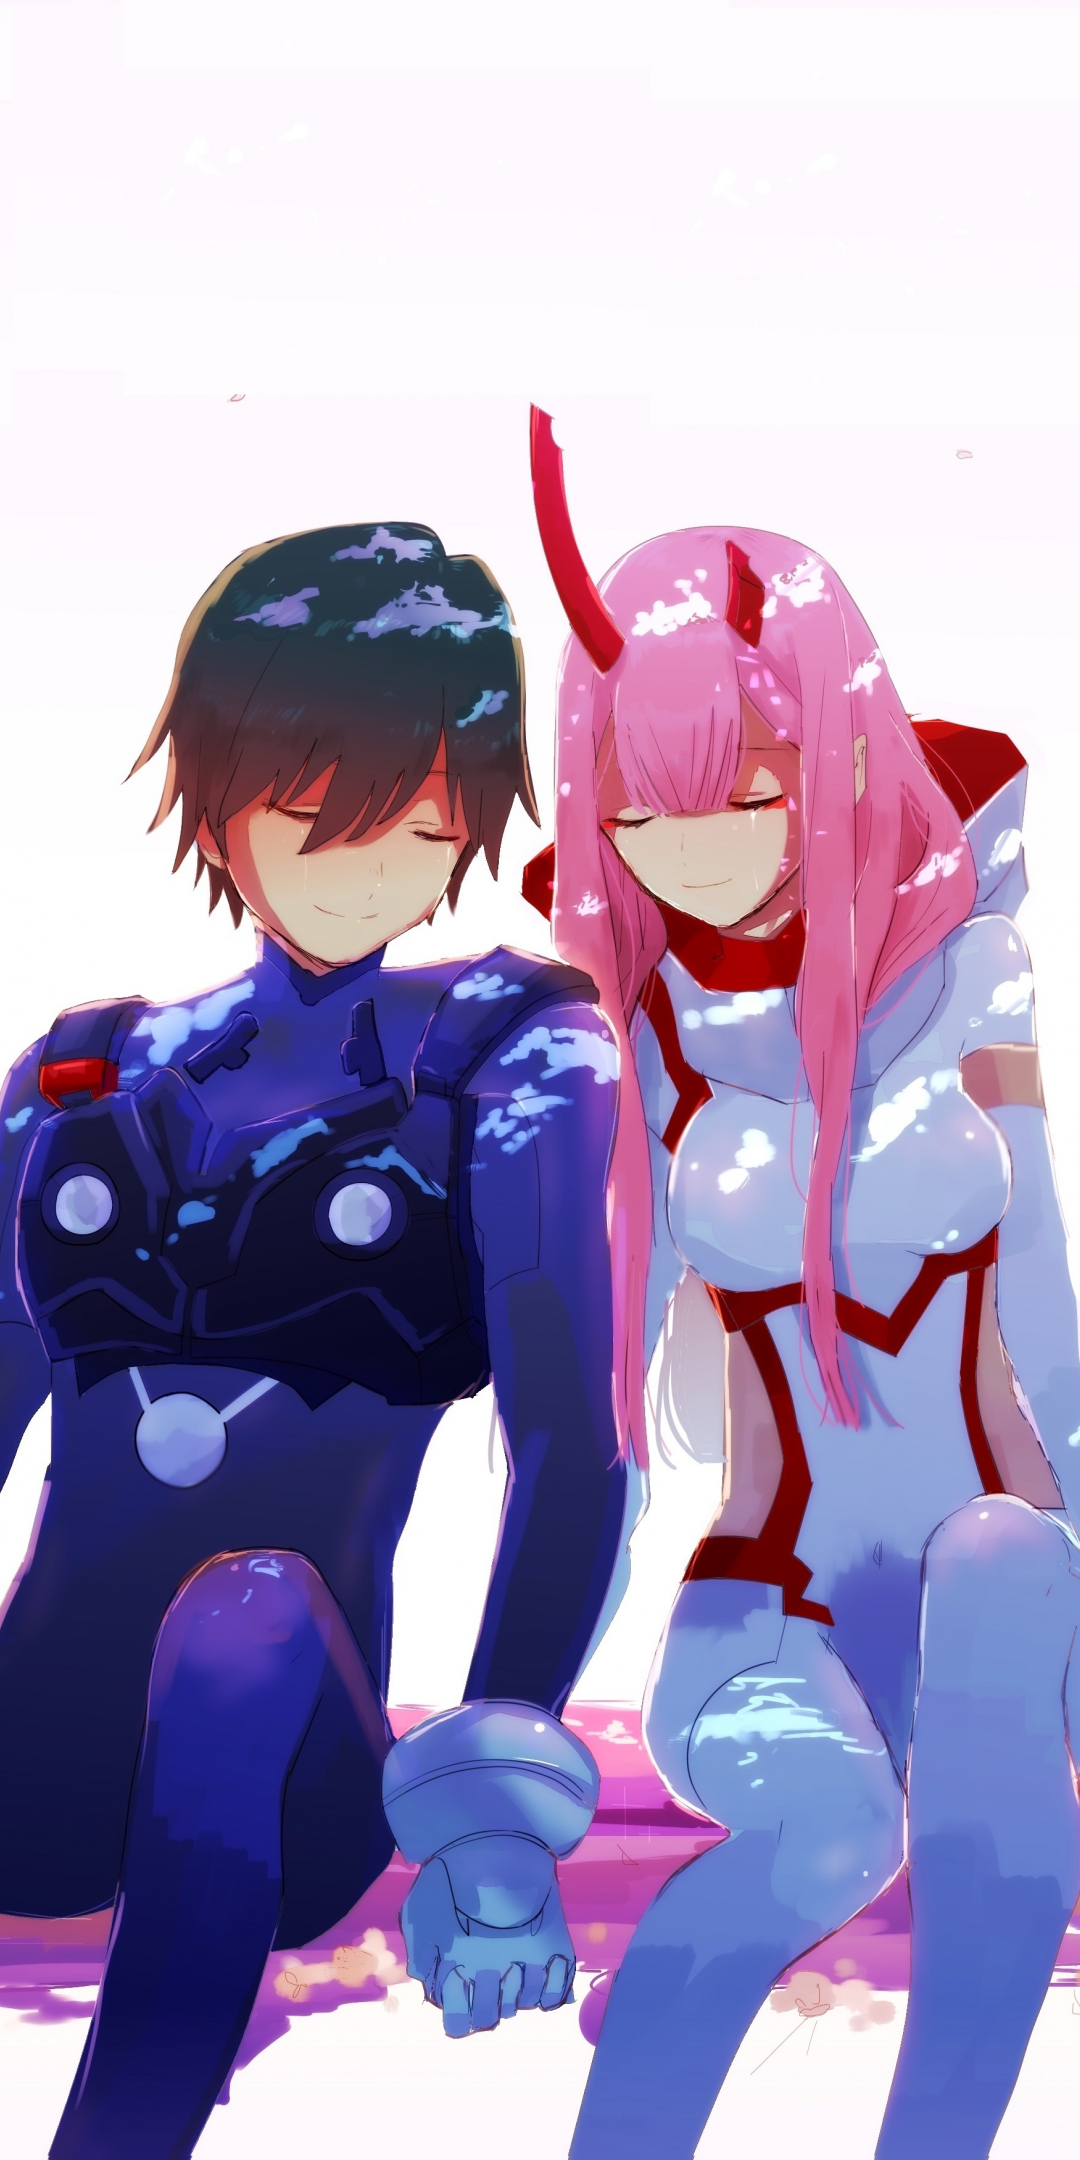 Download wallpaper 1080x2160 hiro and zero two, couple, anime, honor 7x,  honor 9 lite, honor view 10, 1080x2160 hd background, 7159